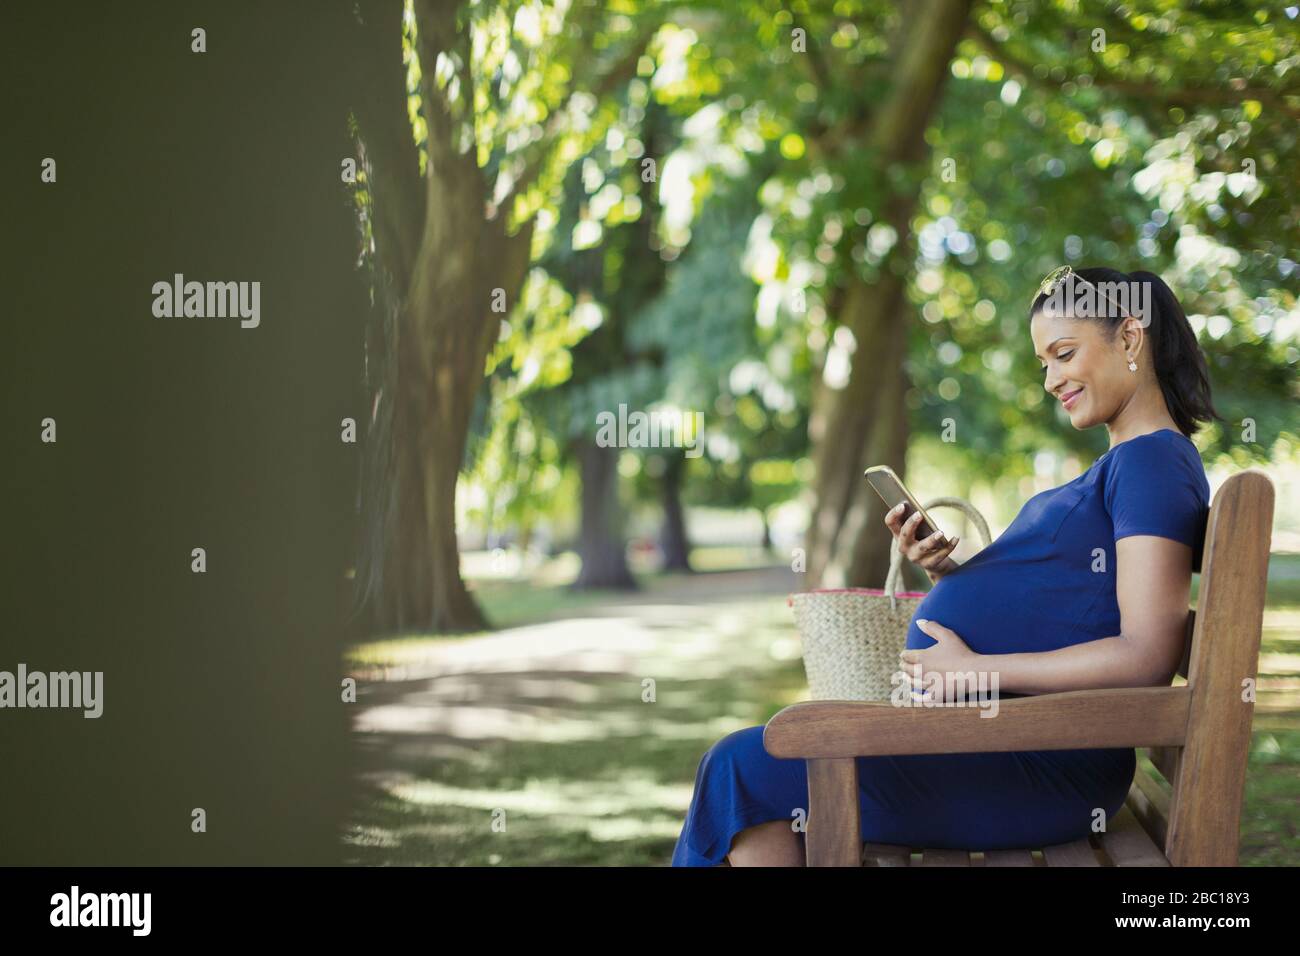 Smiling pregnant woman texting with cell phone on park bench Stock Photo